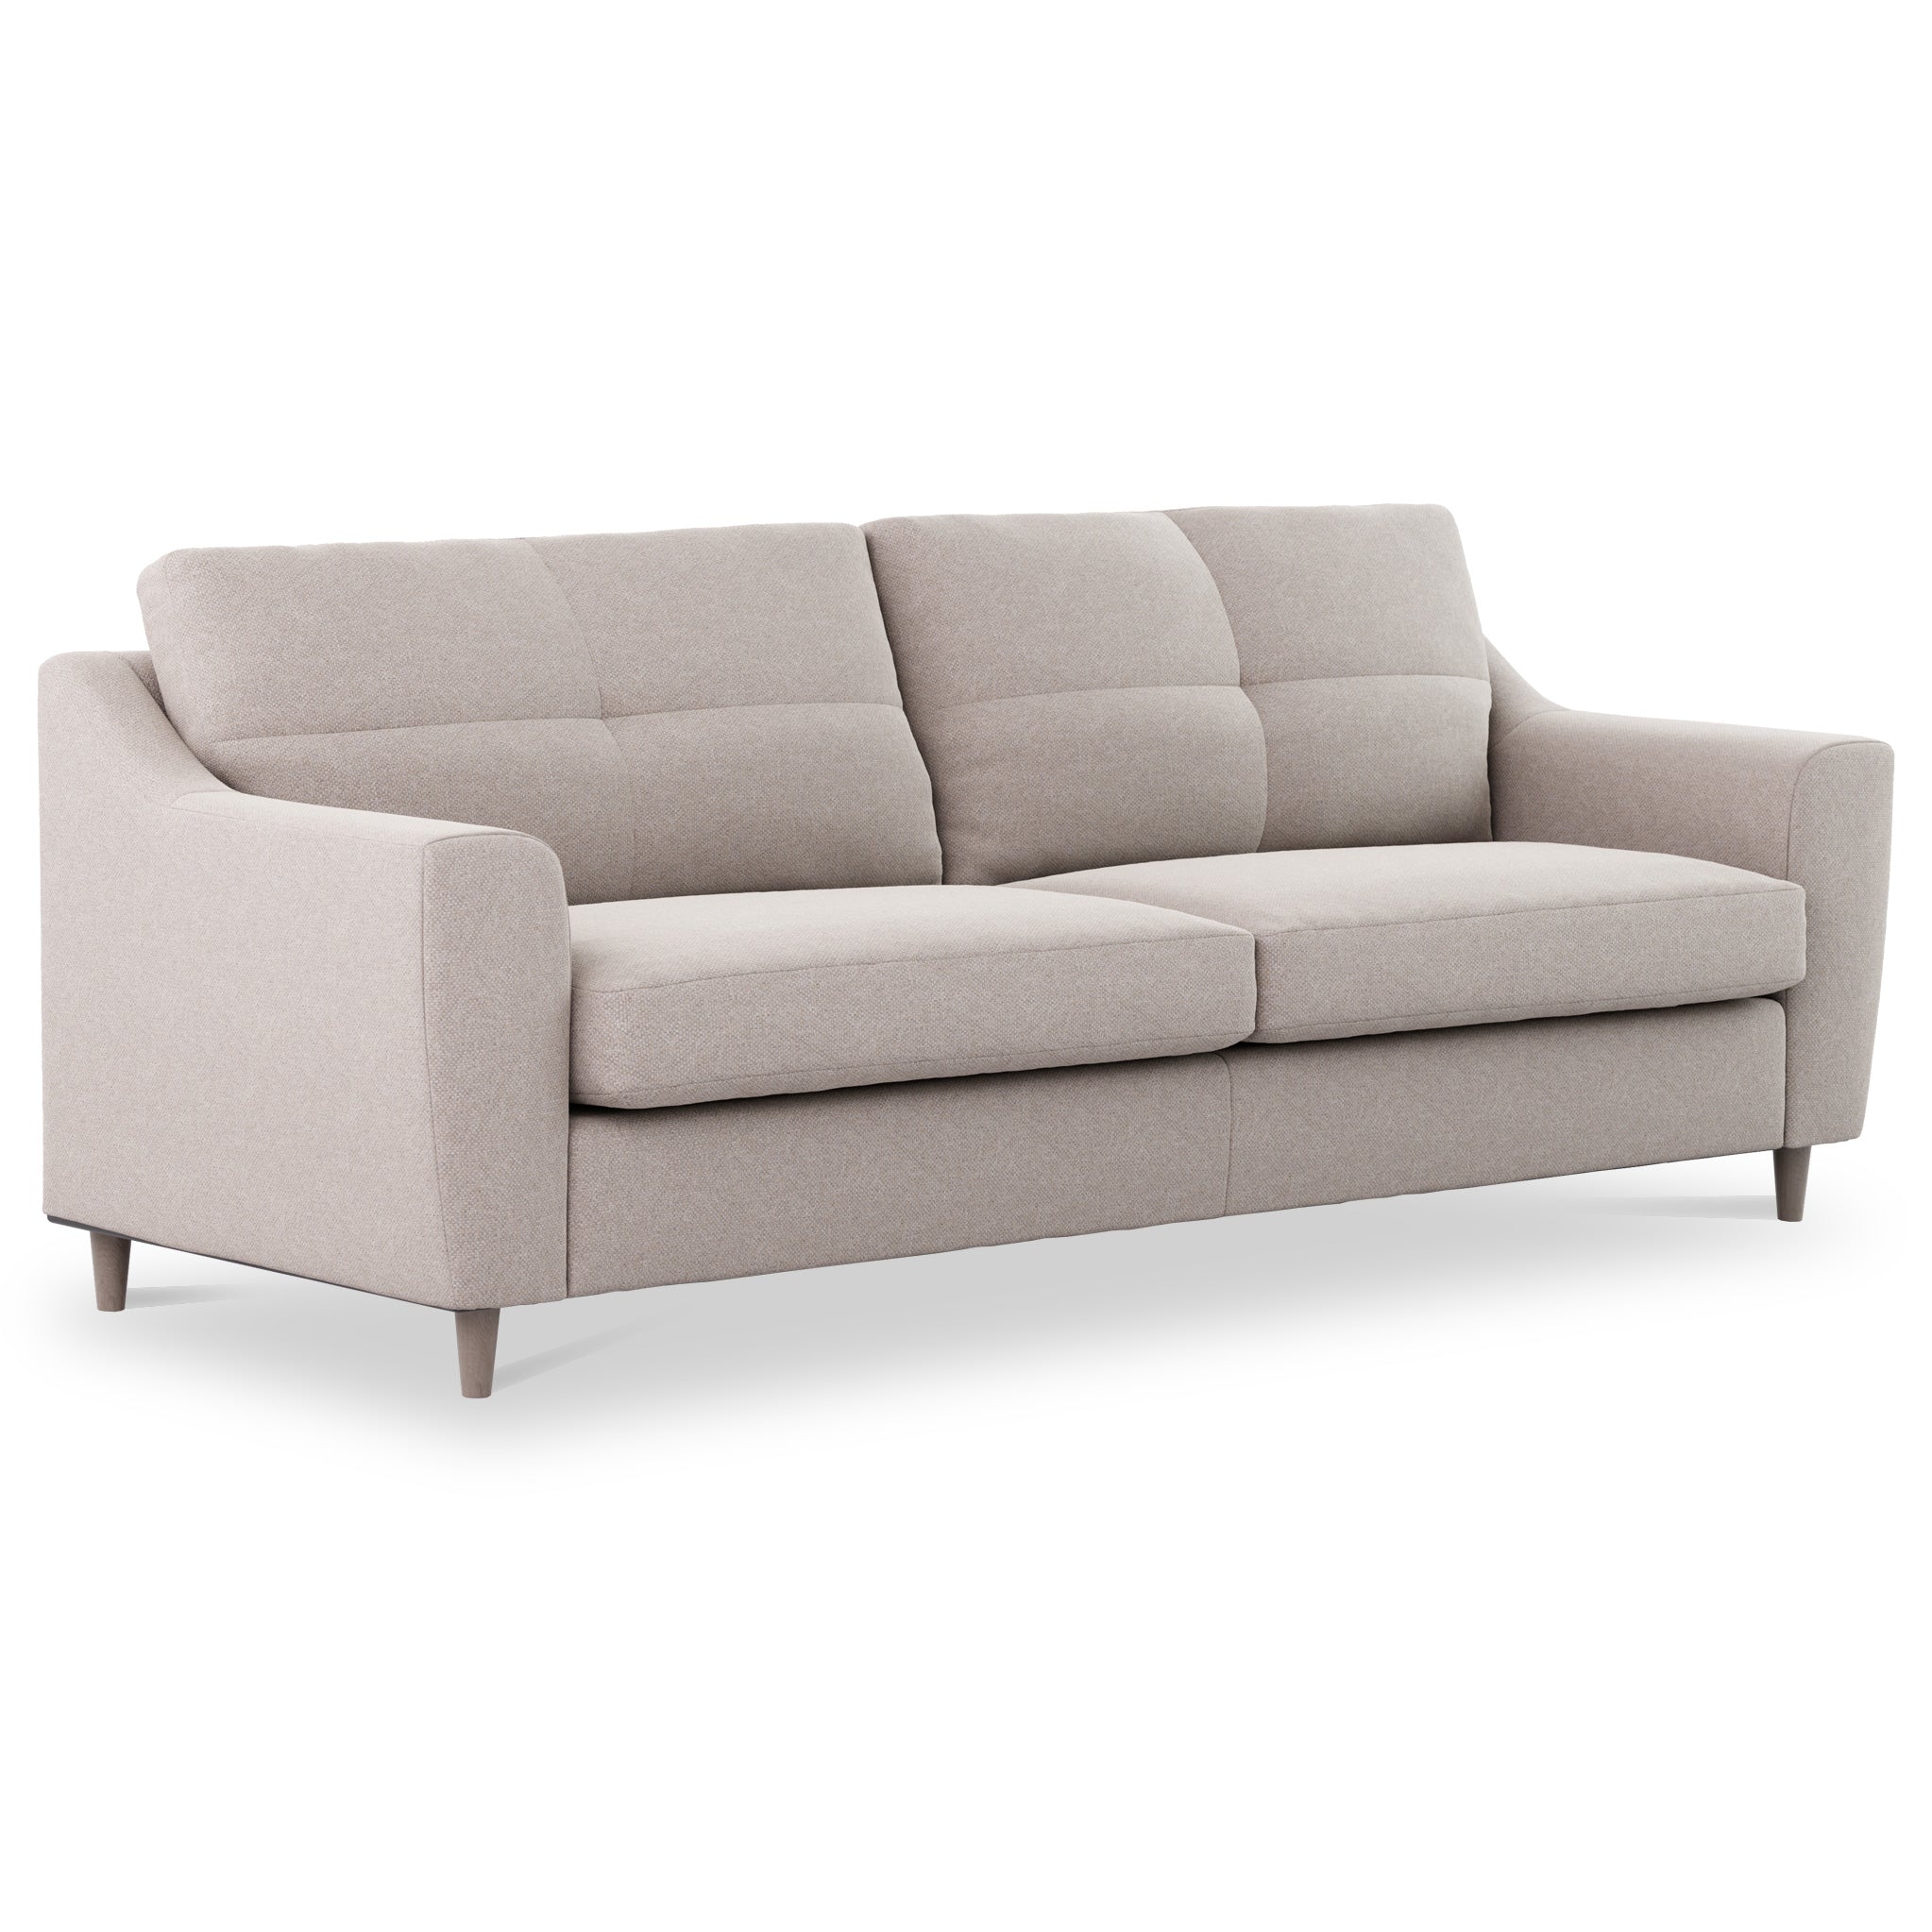 Justin 4 Seater Fabric Sofa Traditional Tufted Couch Roseland